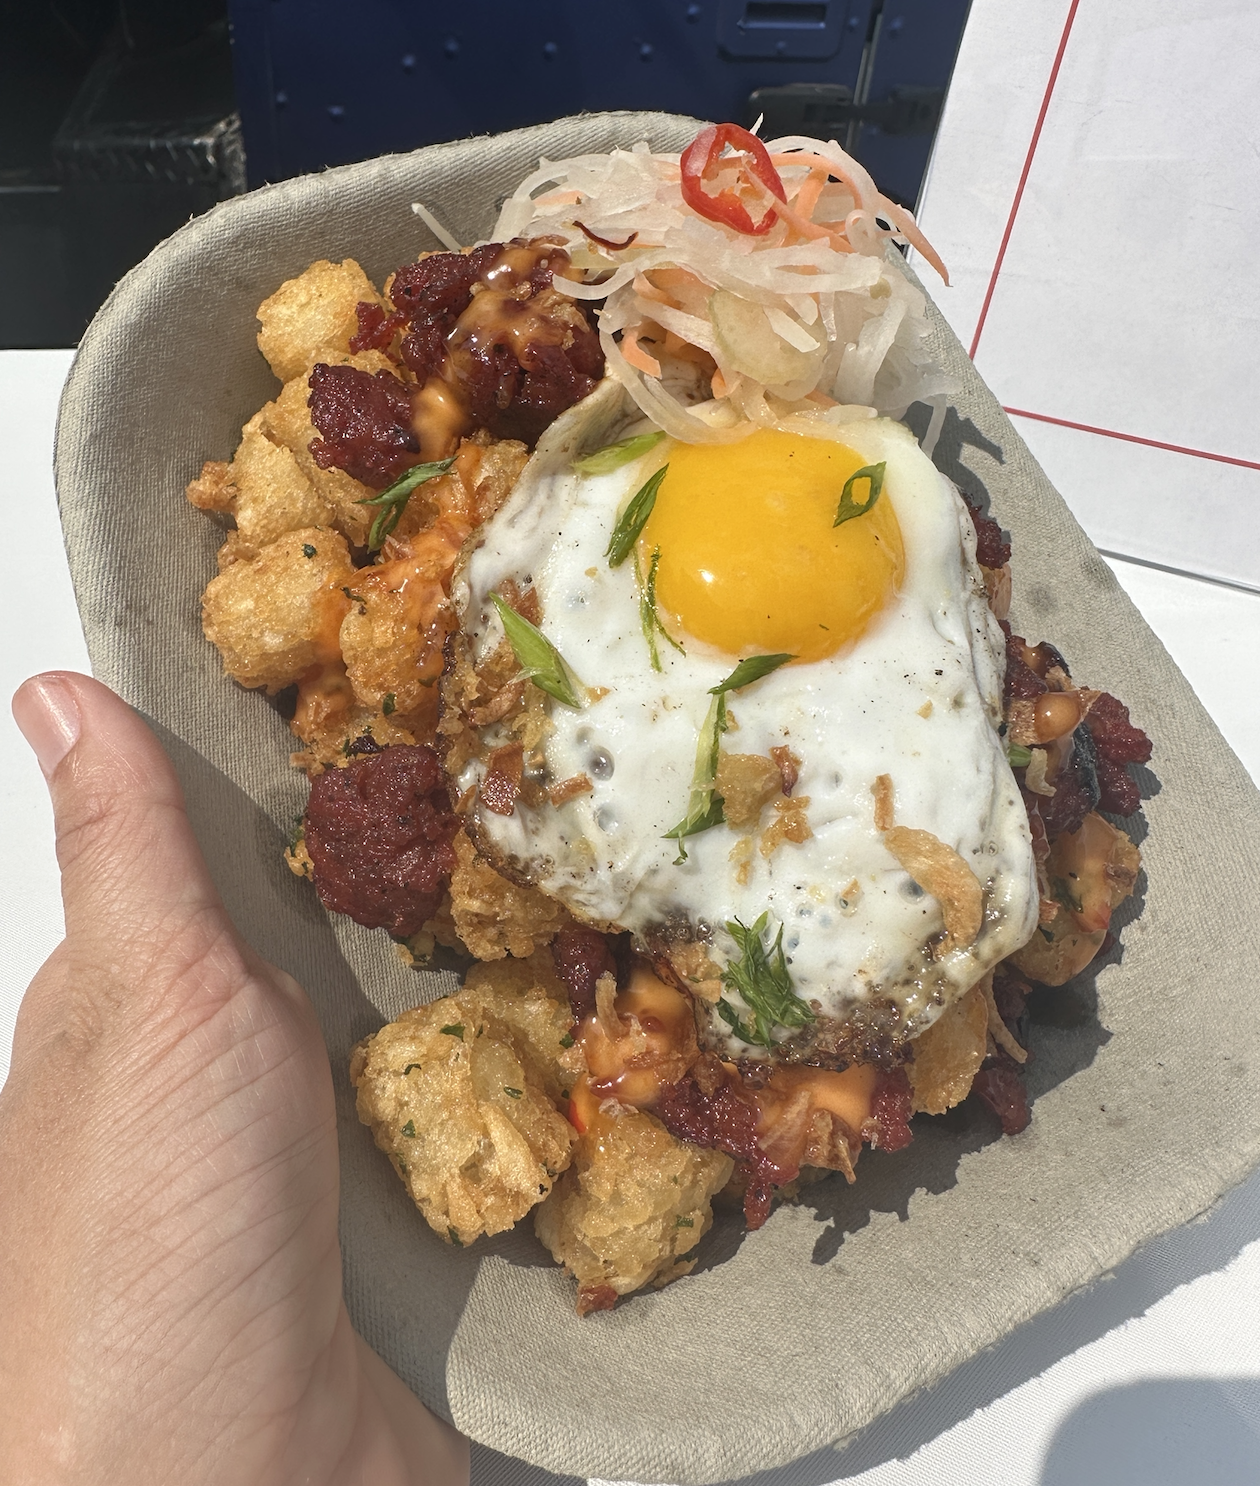 tater tots with an egg on top